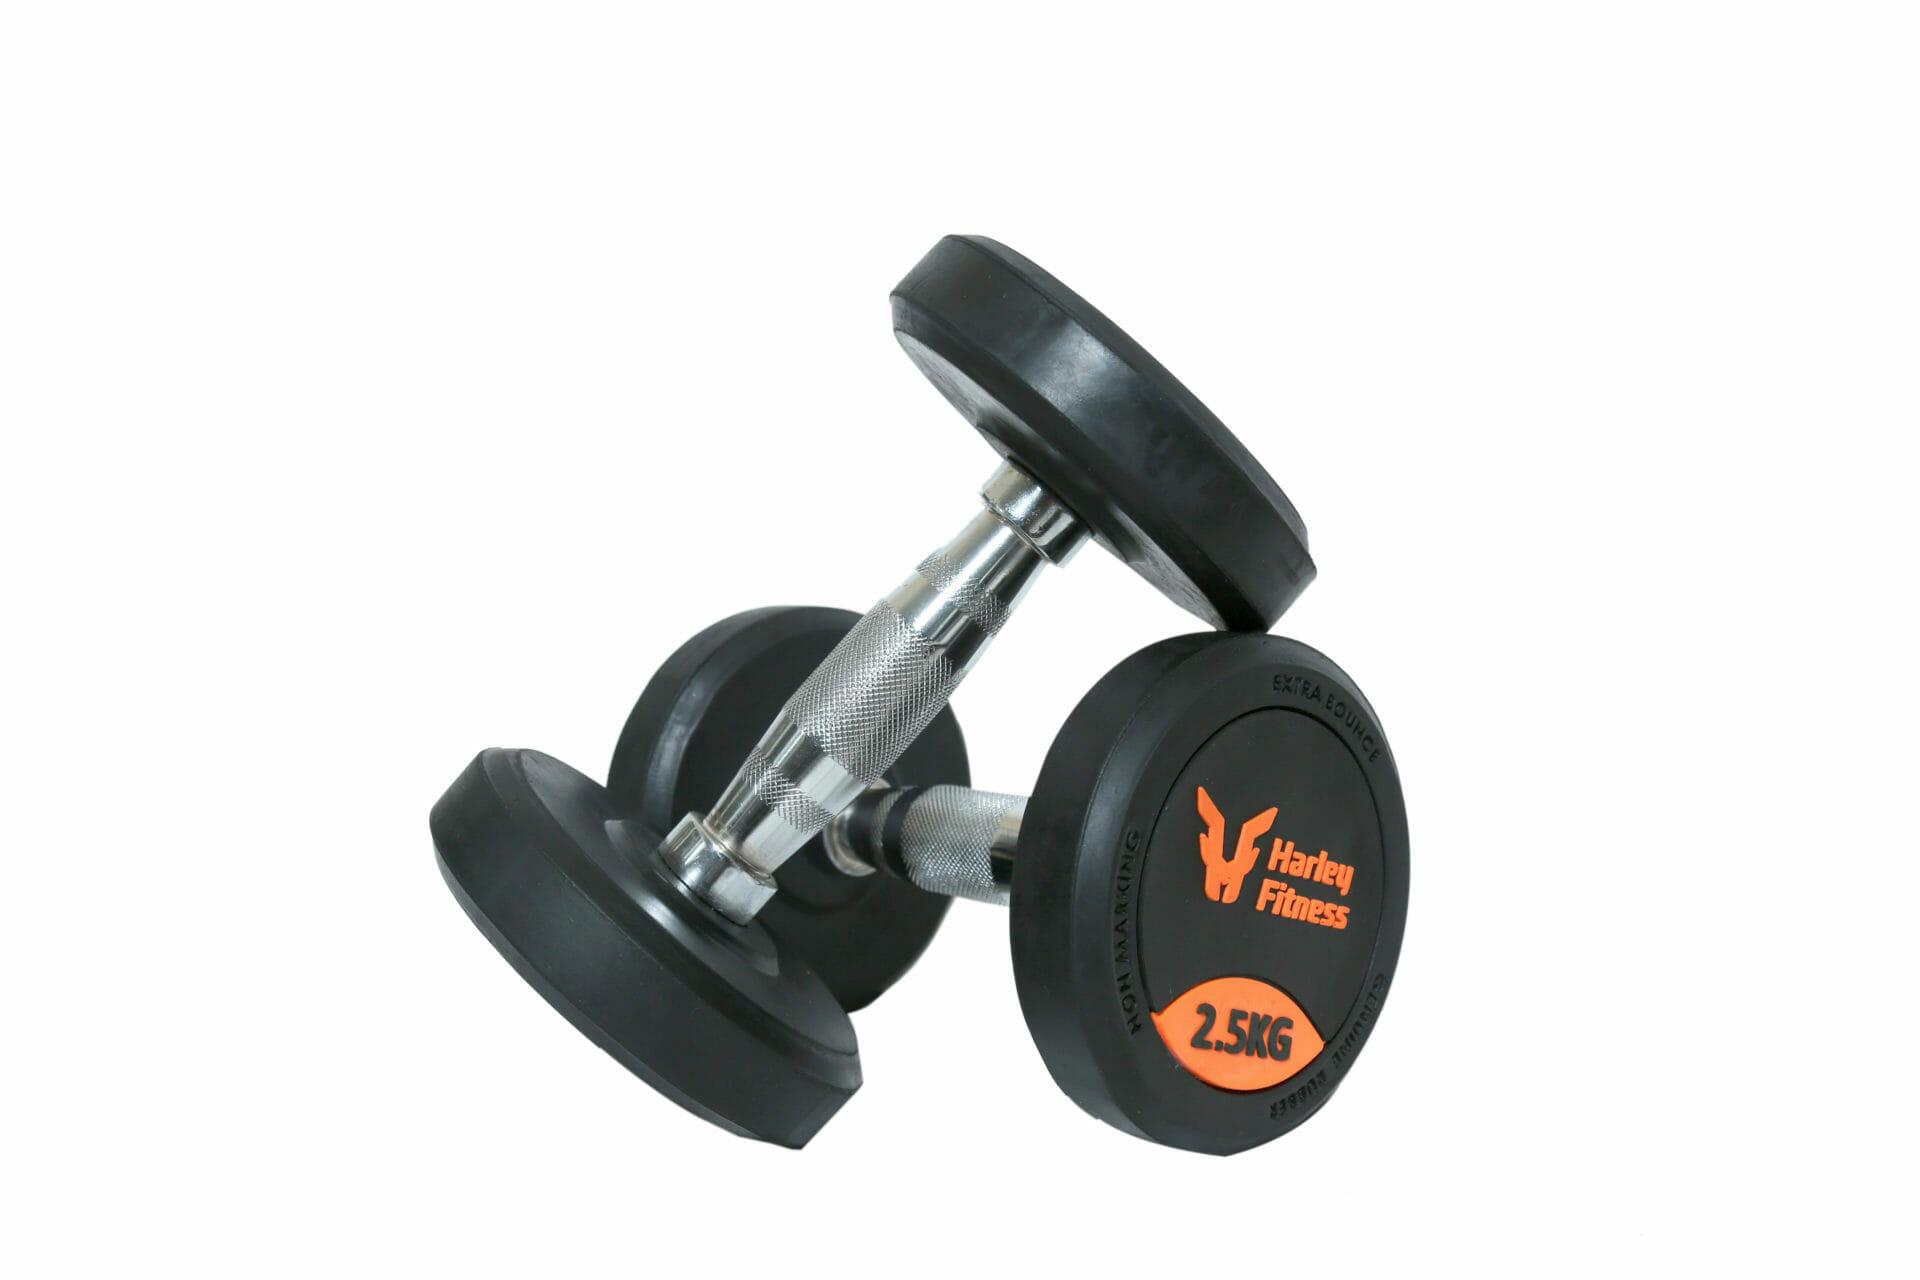 Harley Fitness 2.5kg Premium Rubber Coated Bouncing Round Dumbbells 1 Pair